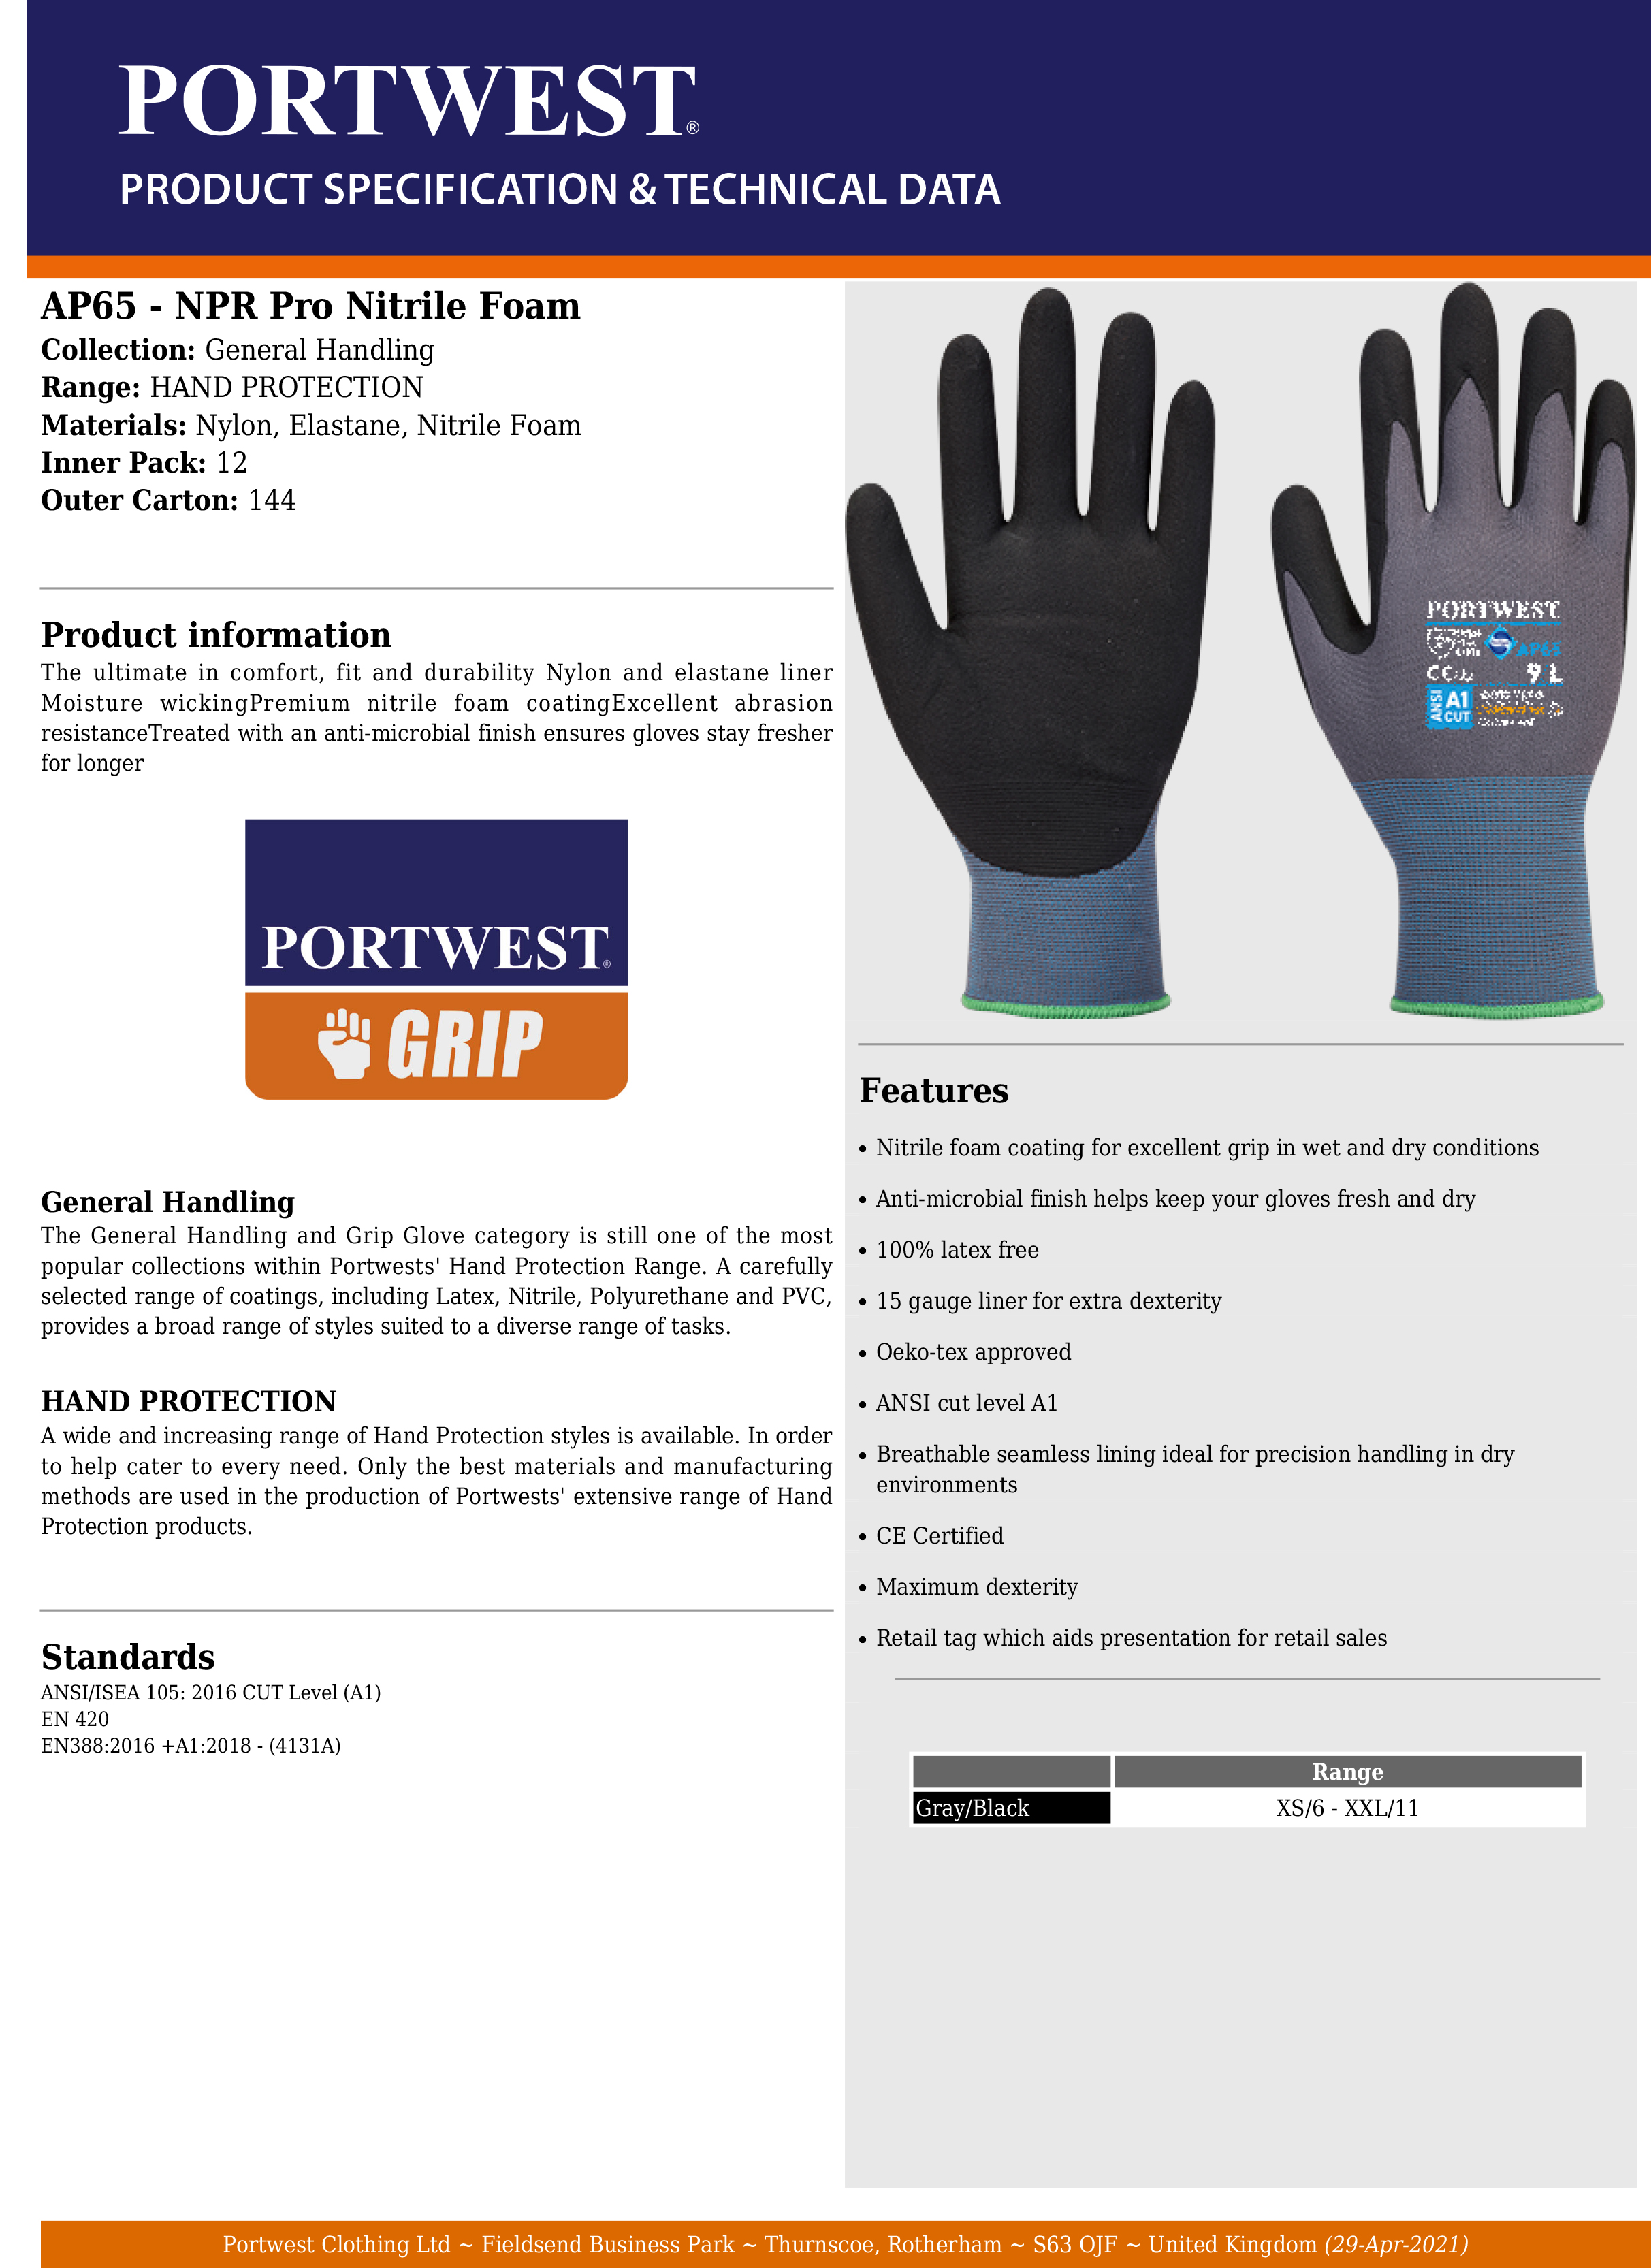 Protect Your Hands with the Best Gloves for Package Handlers